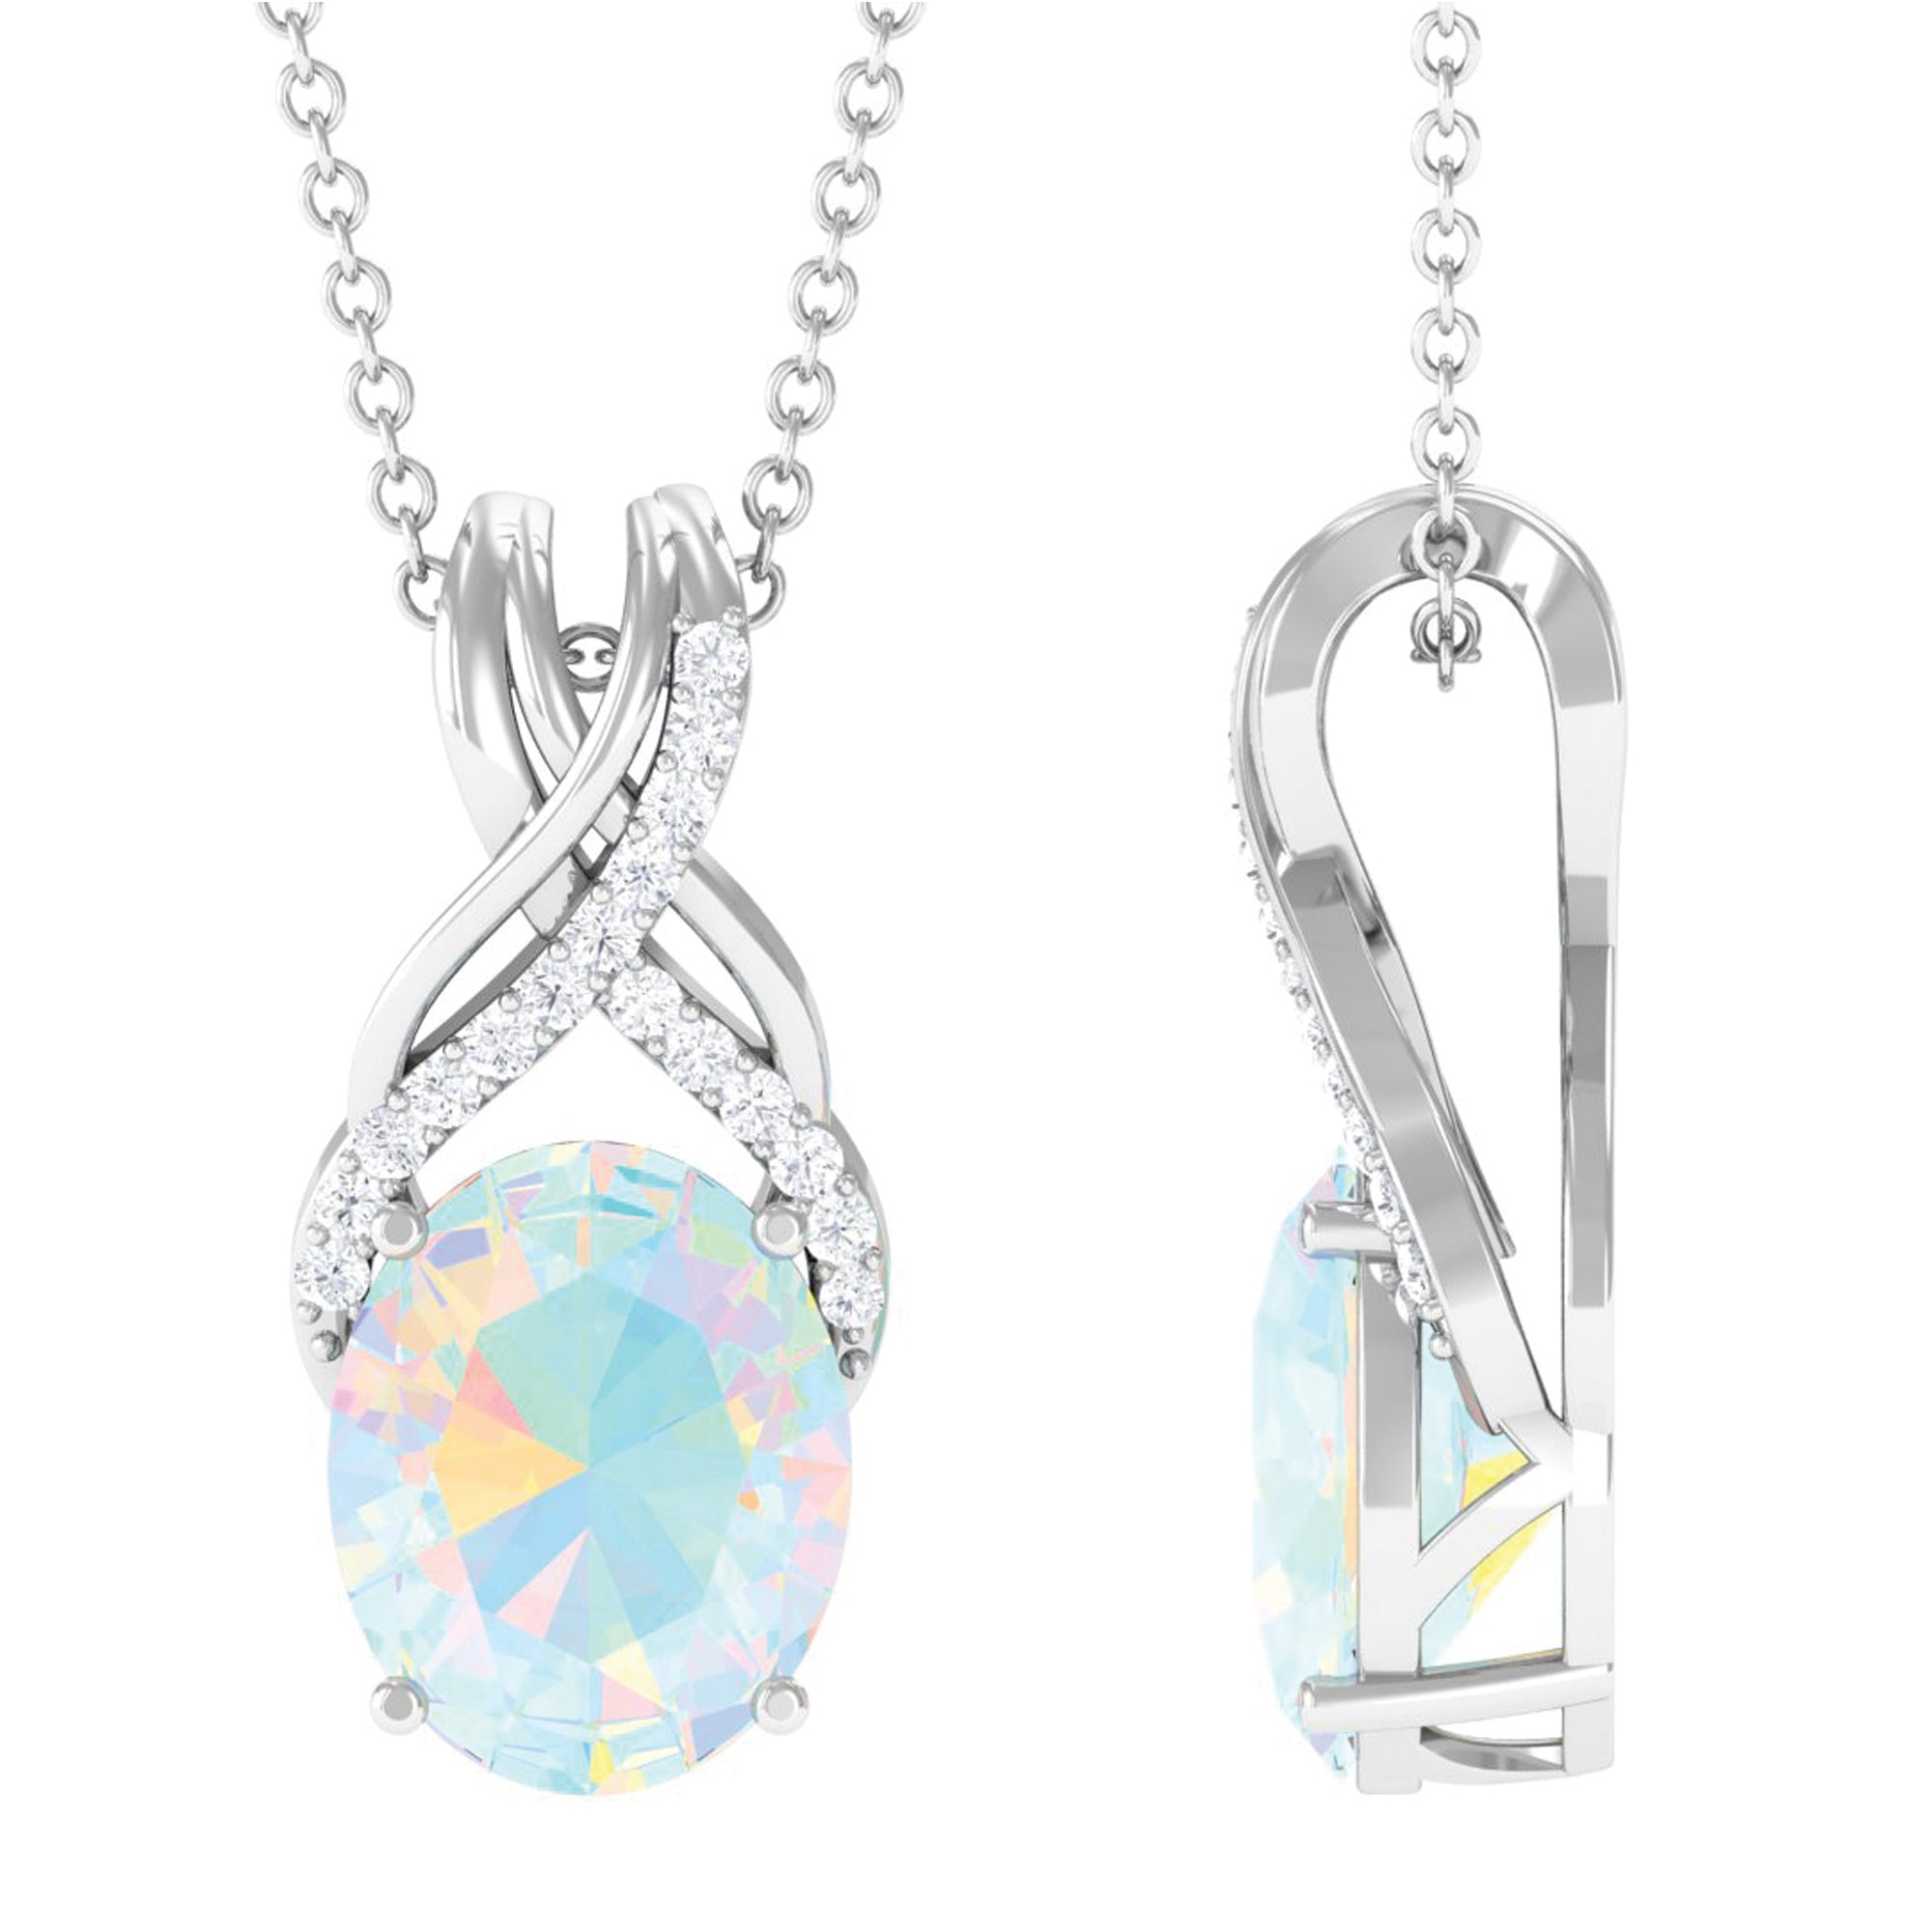 Rosec Jewels-Oval Ethiopian Opal Solitaire Pendant with Moissanite Twisted Bail